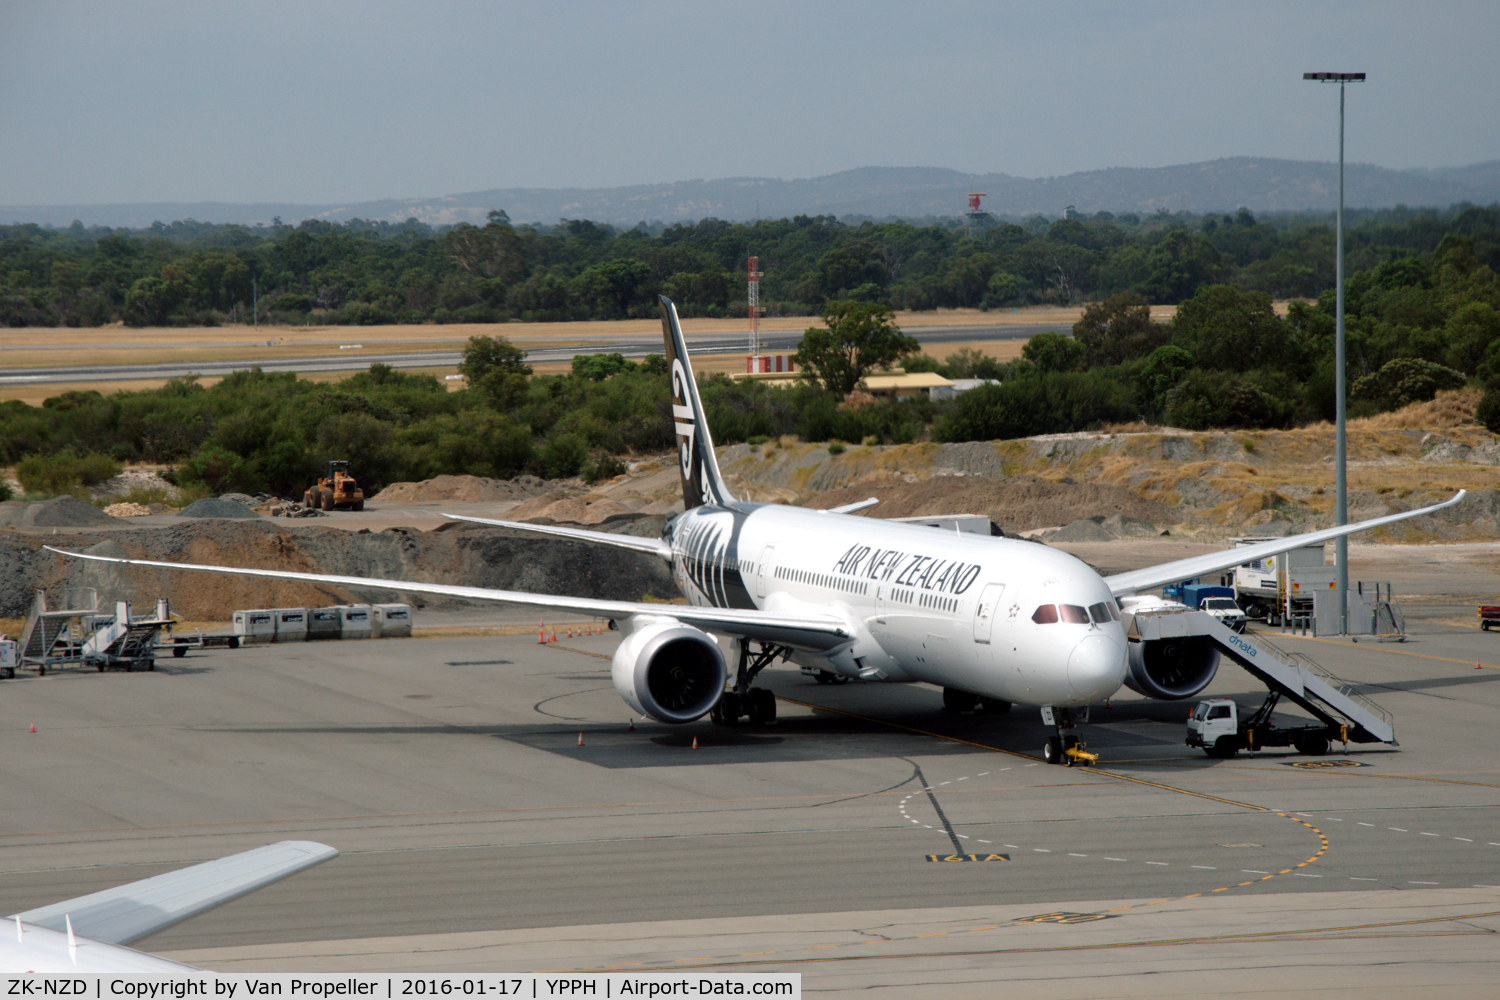 ZK-NZD, 2013 Boeing 787-9 Dreamliner C/N 41989, Boeing 787-9 of Air New Zealand parked at Perth airport, Western Australia